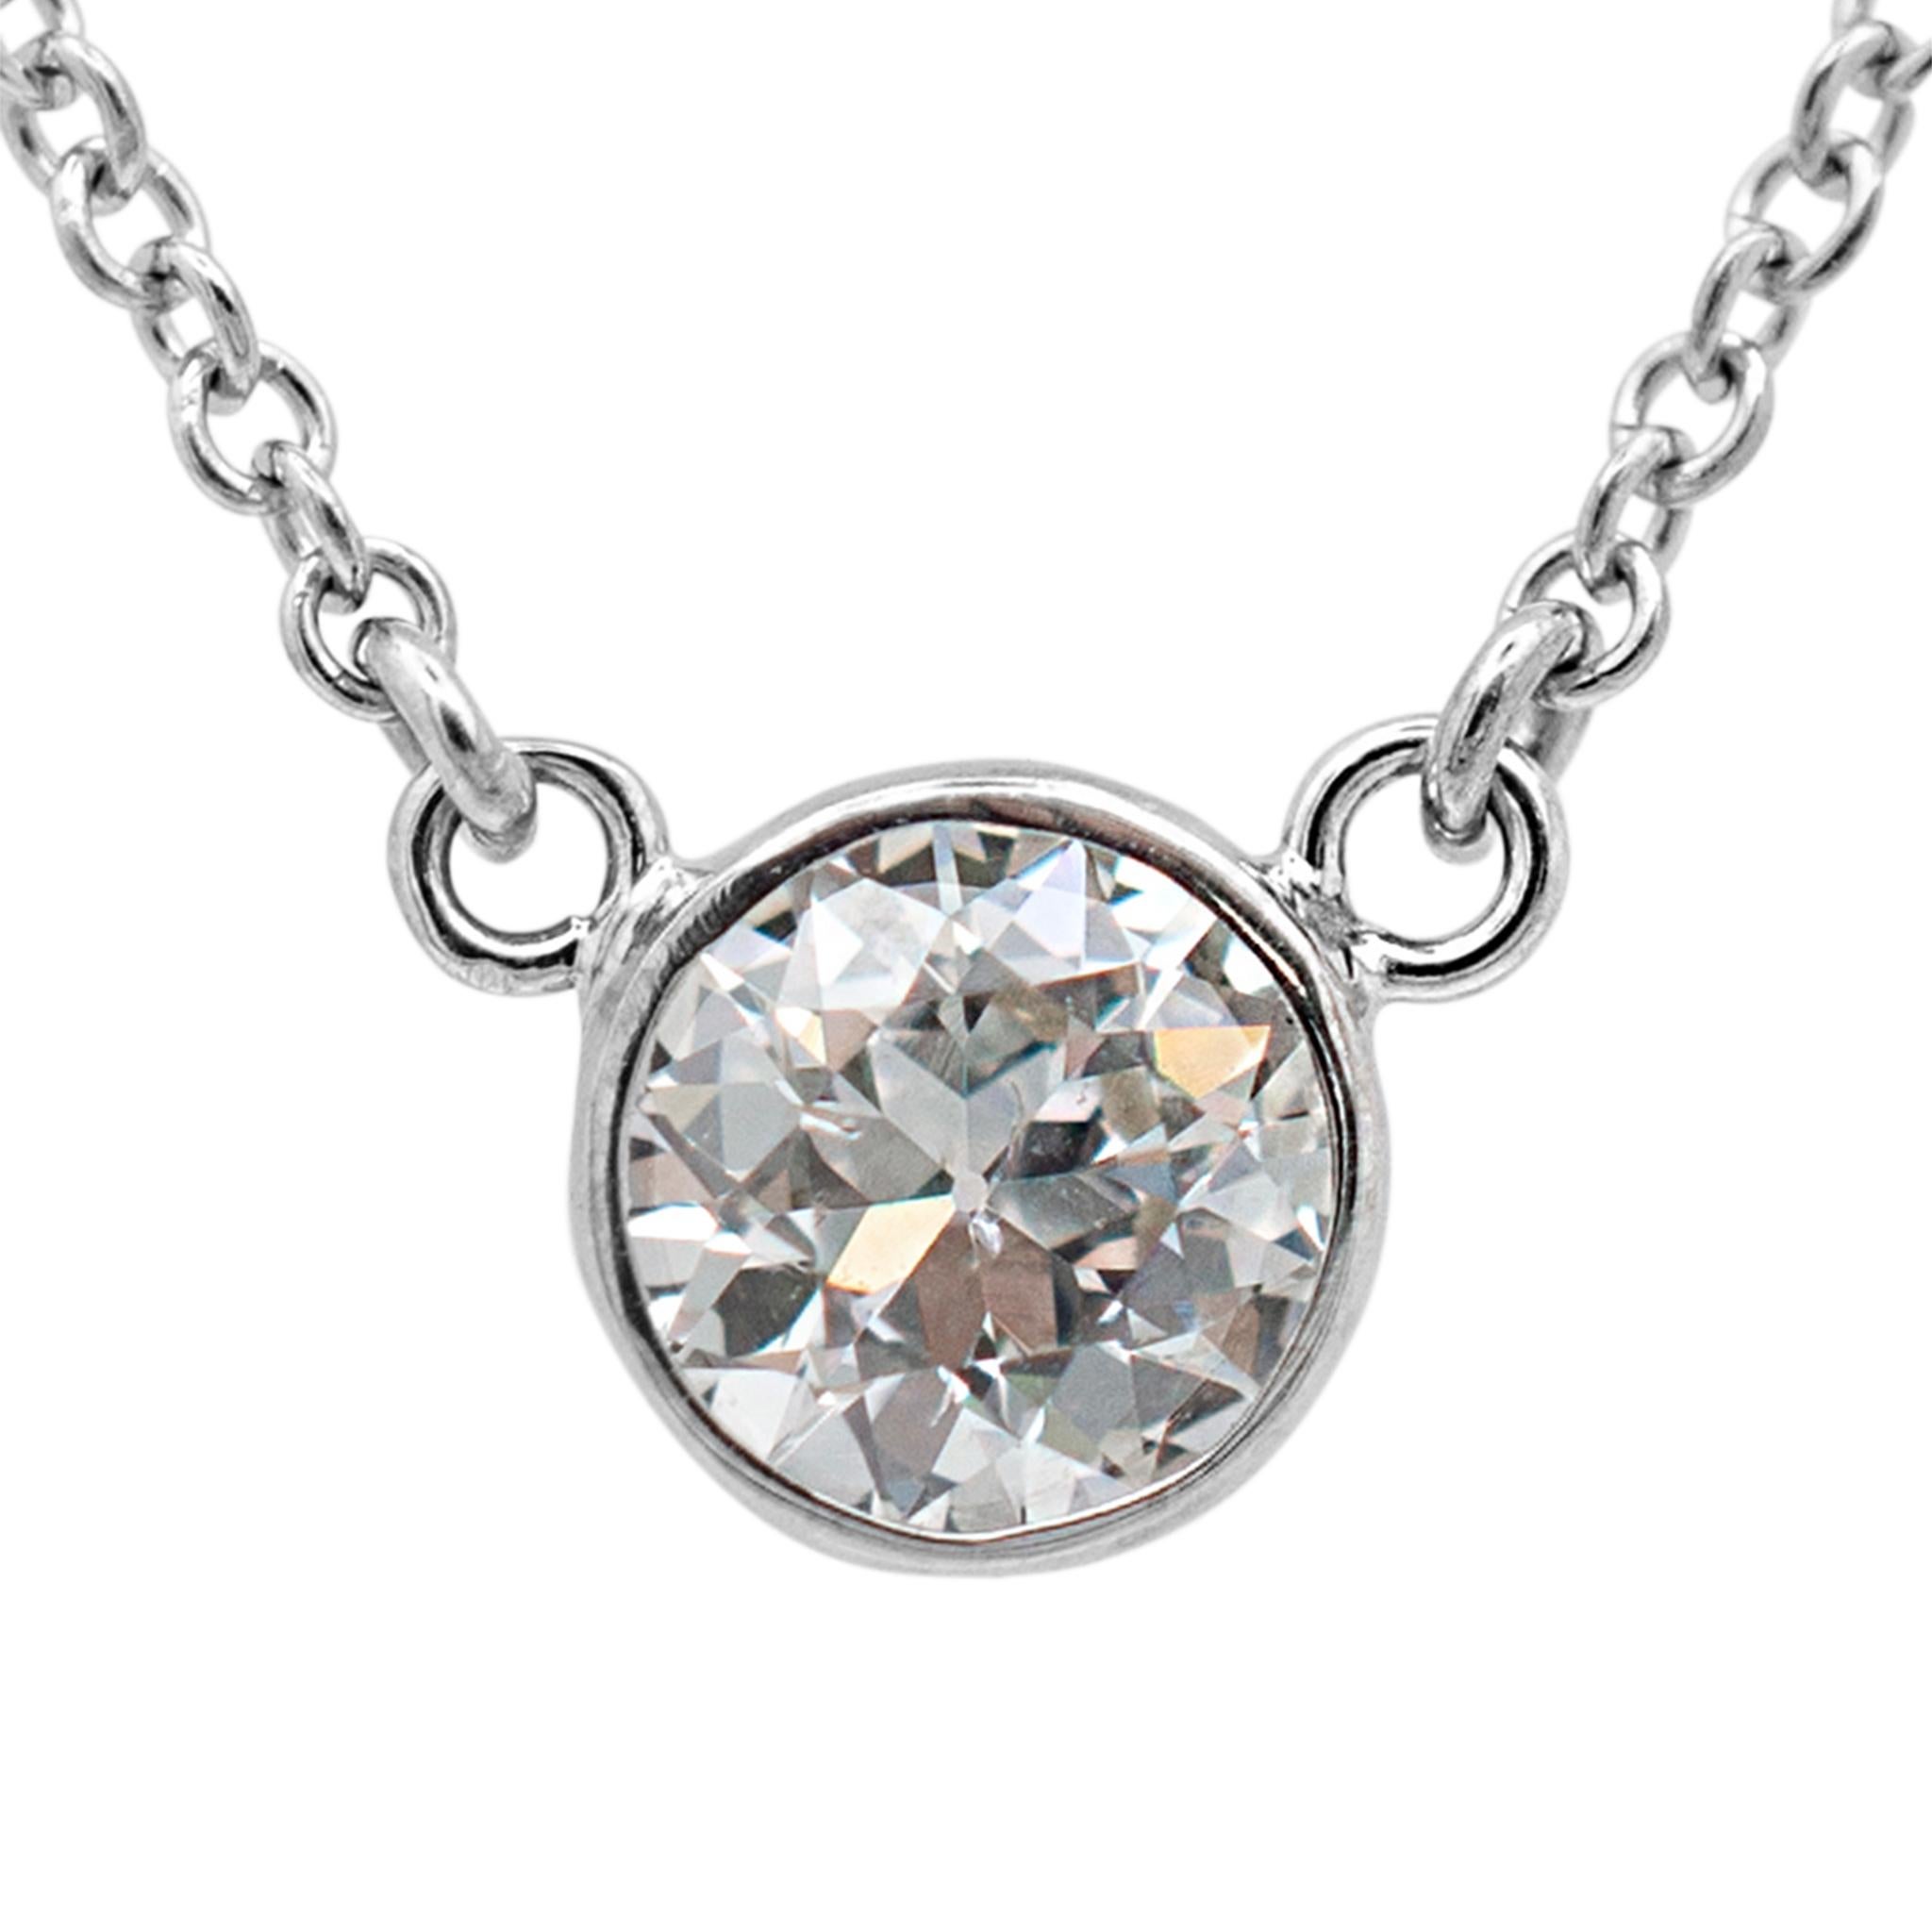 Gender: Ladies

Metal Type: 14K White Gold

Length: 16.00 inches

Weight: 1.98 grams

Ladies 14K white gold single strand collar, diamond necklace. Engraved with 